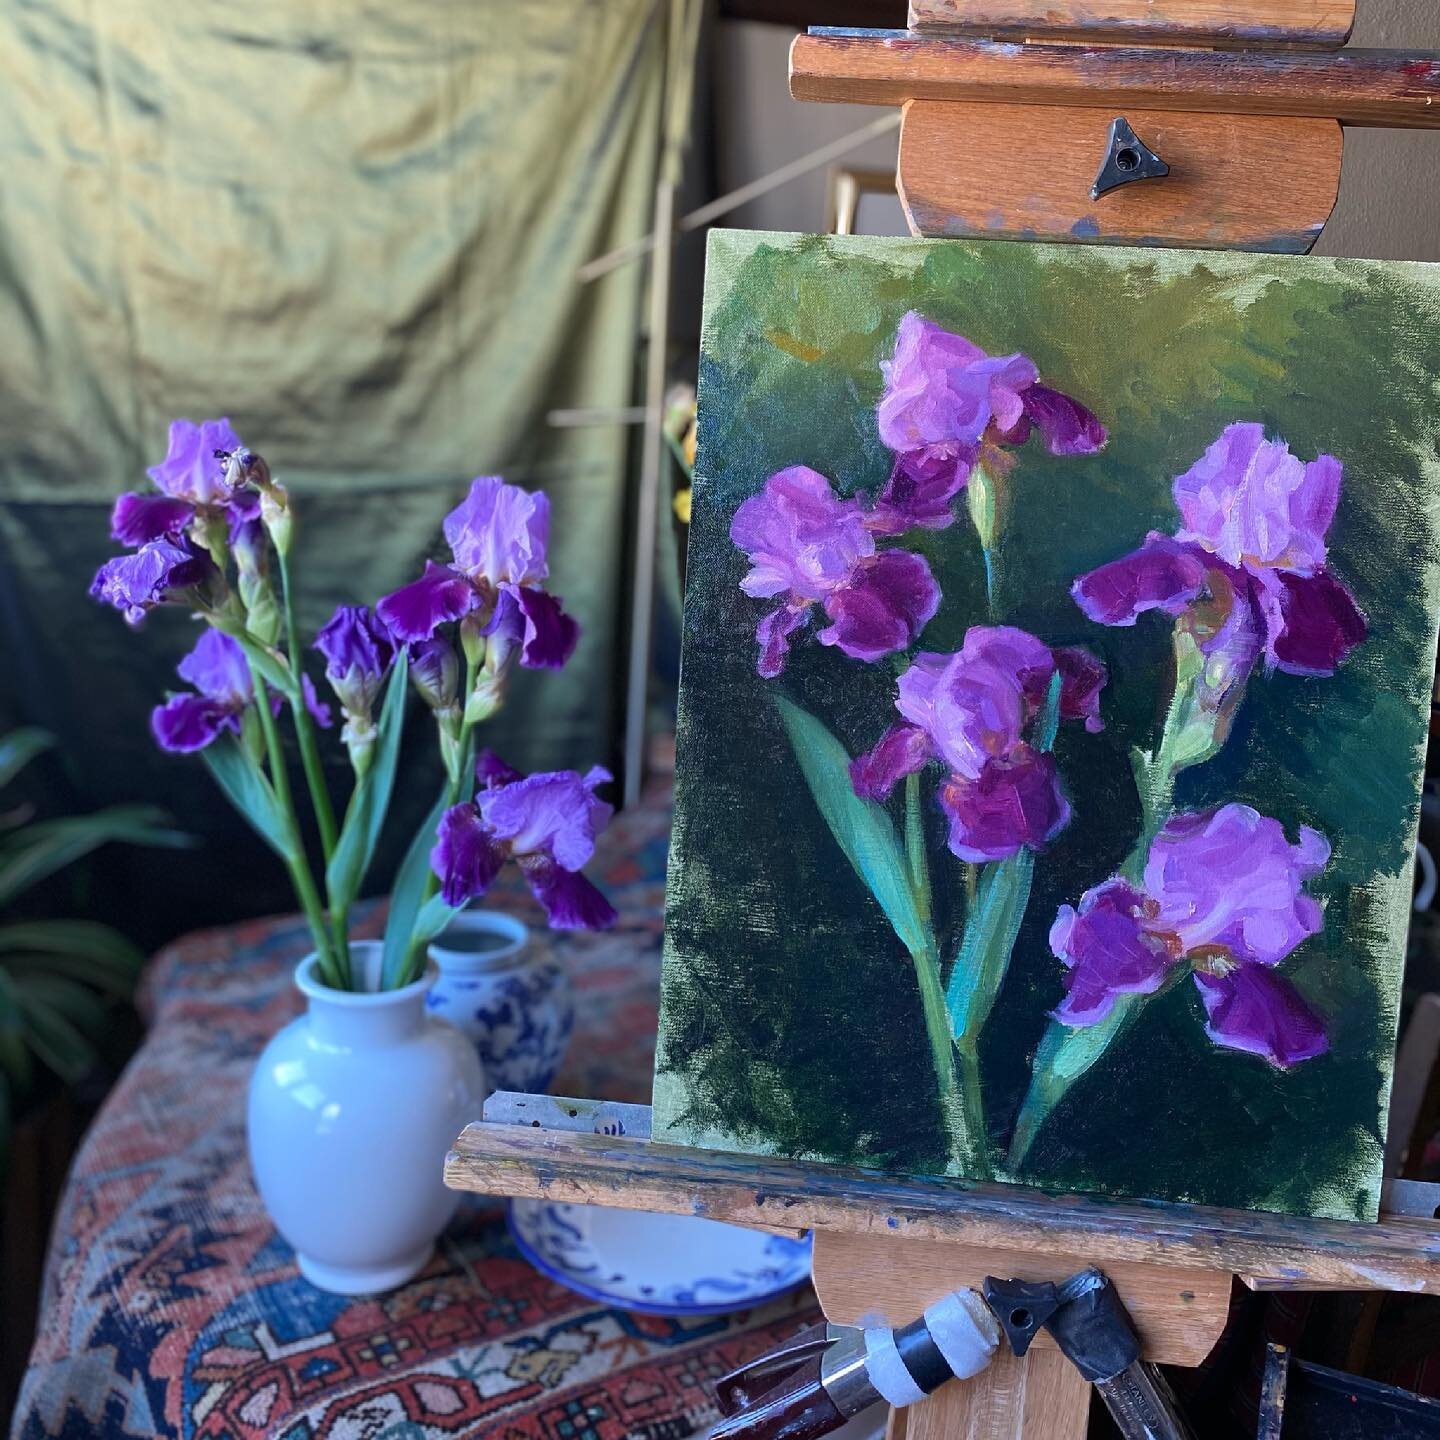 Still some work to do on this but working fast to finish this up this afternoon before all the blooms go bust! 😅😅

This and several other florals, still lifes, and figurative works will be part of my summer exhibition at the Pearson Lakes Art Cente